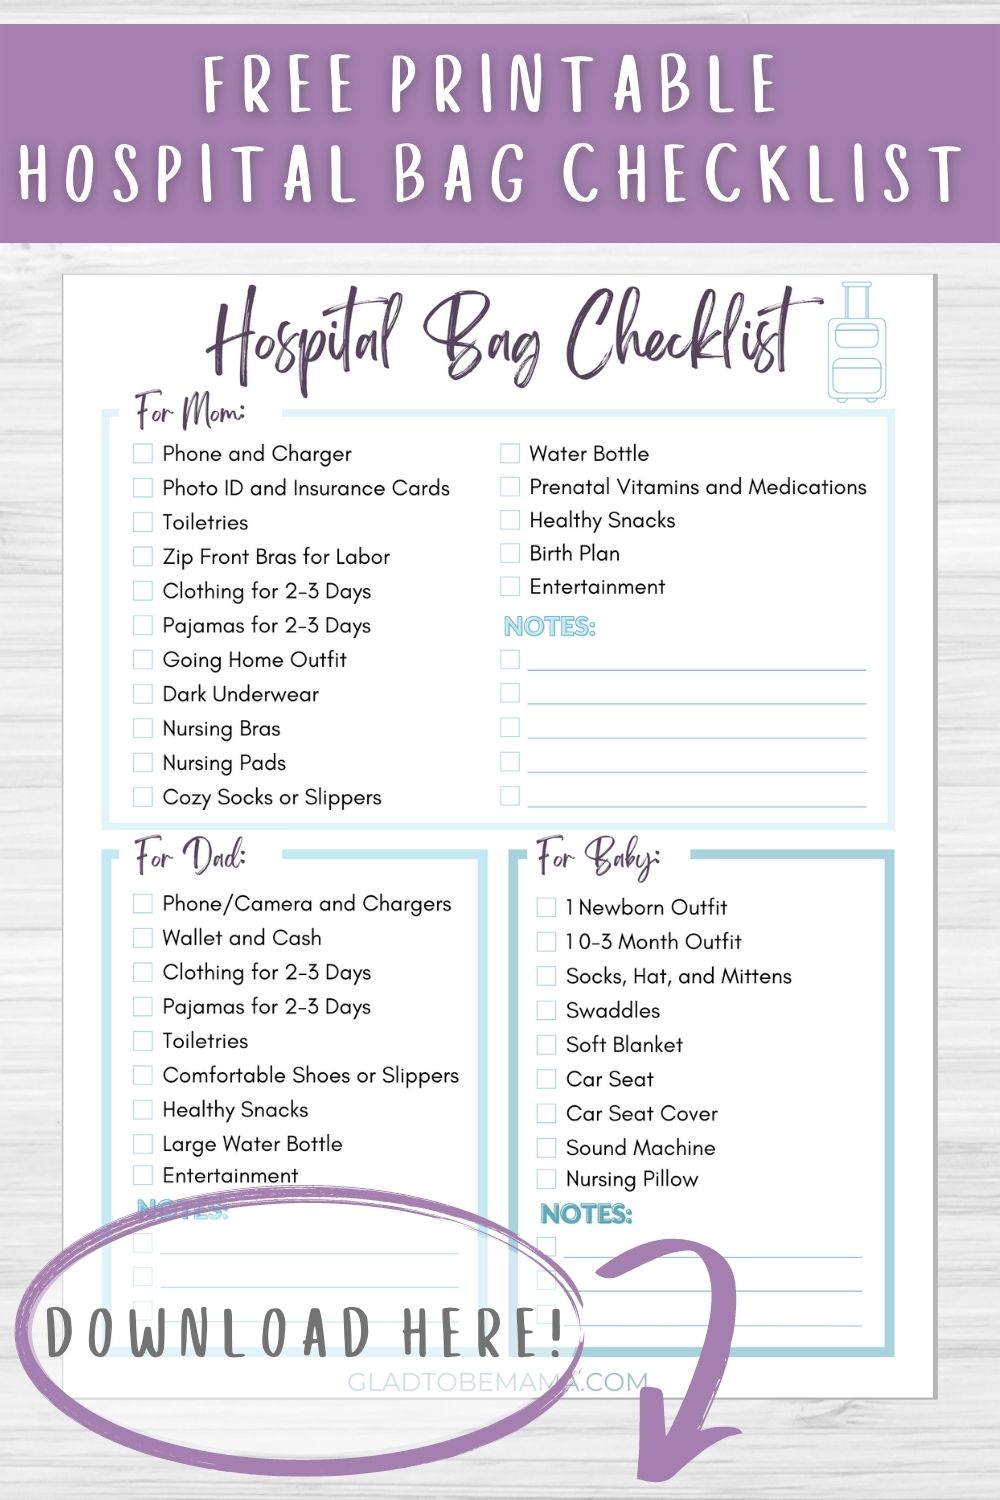 Ultimate Hospital Bag Checklist For Mom, Dad, and Baby | Glad To Be Mama